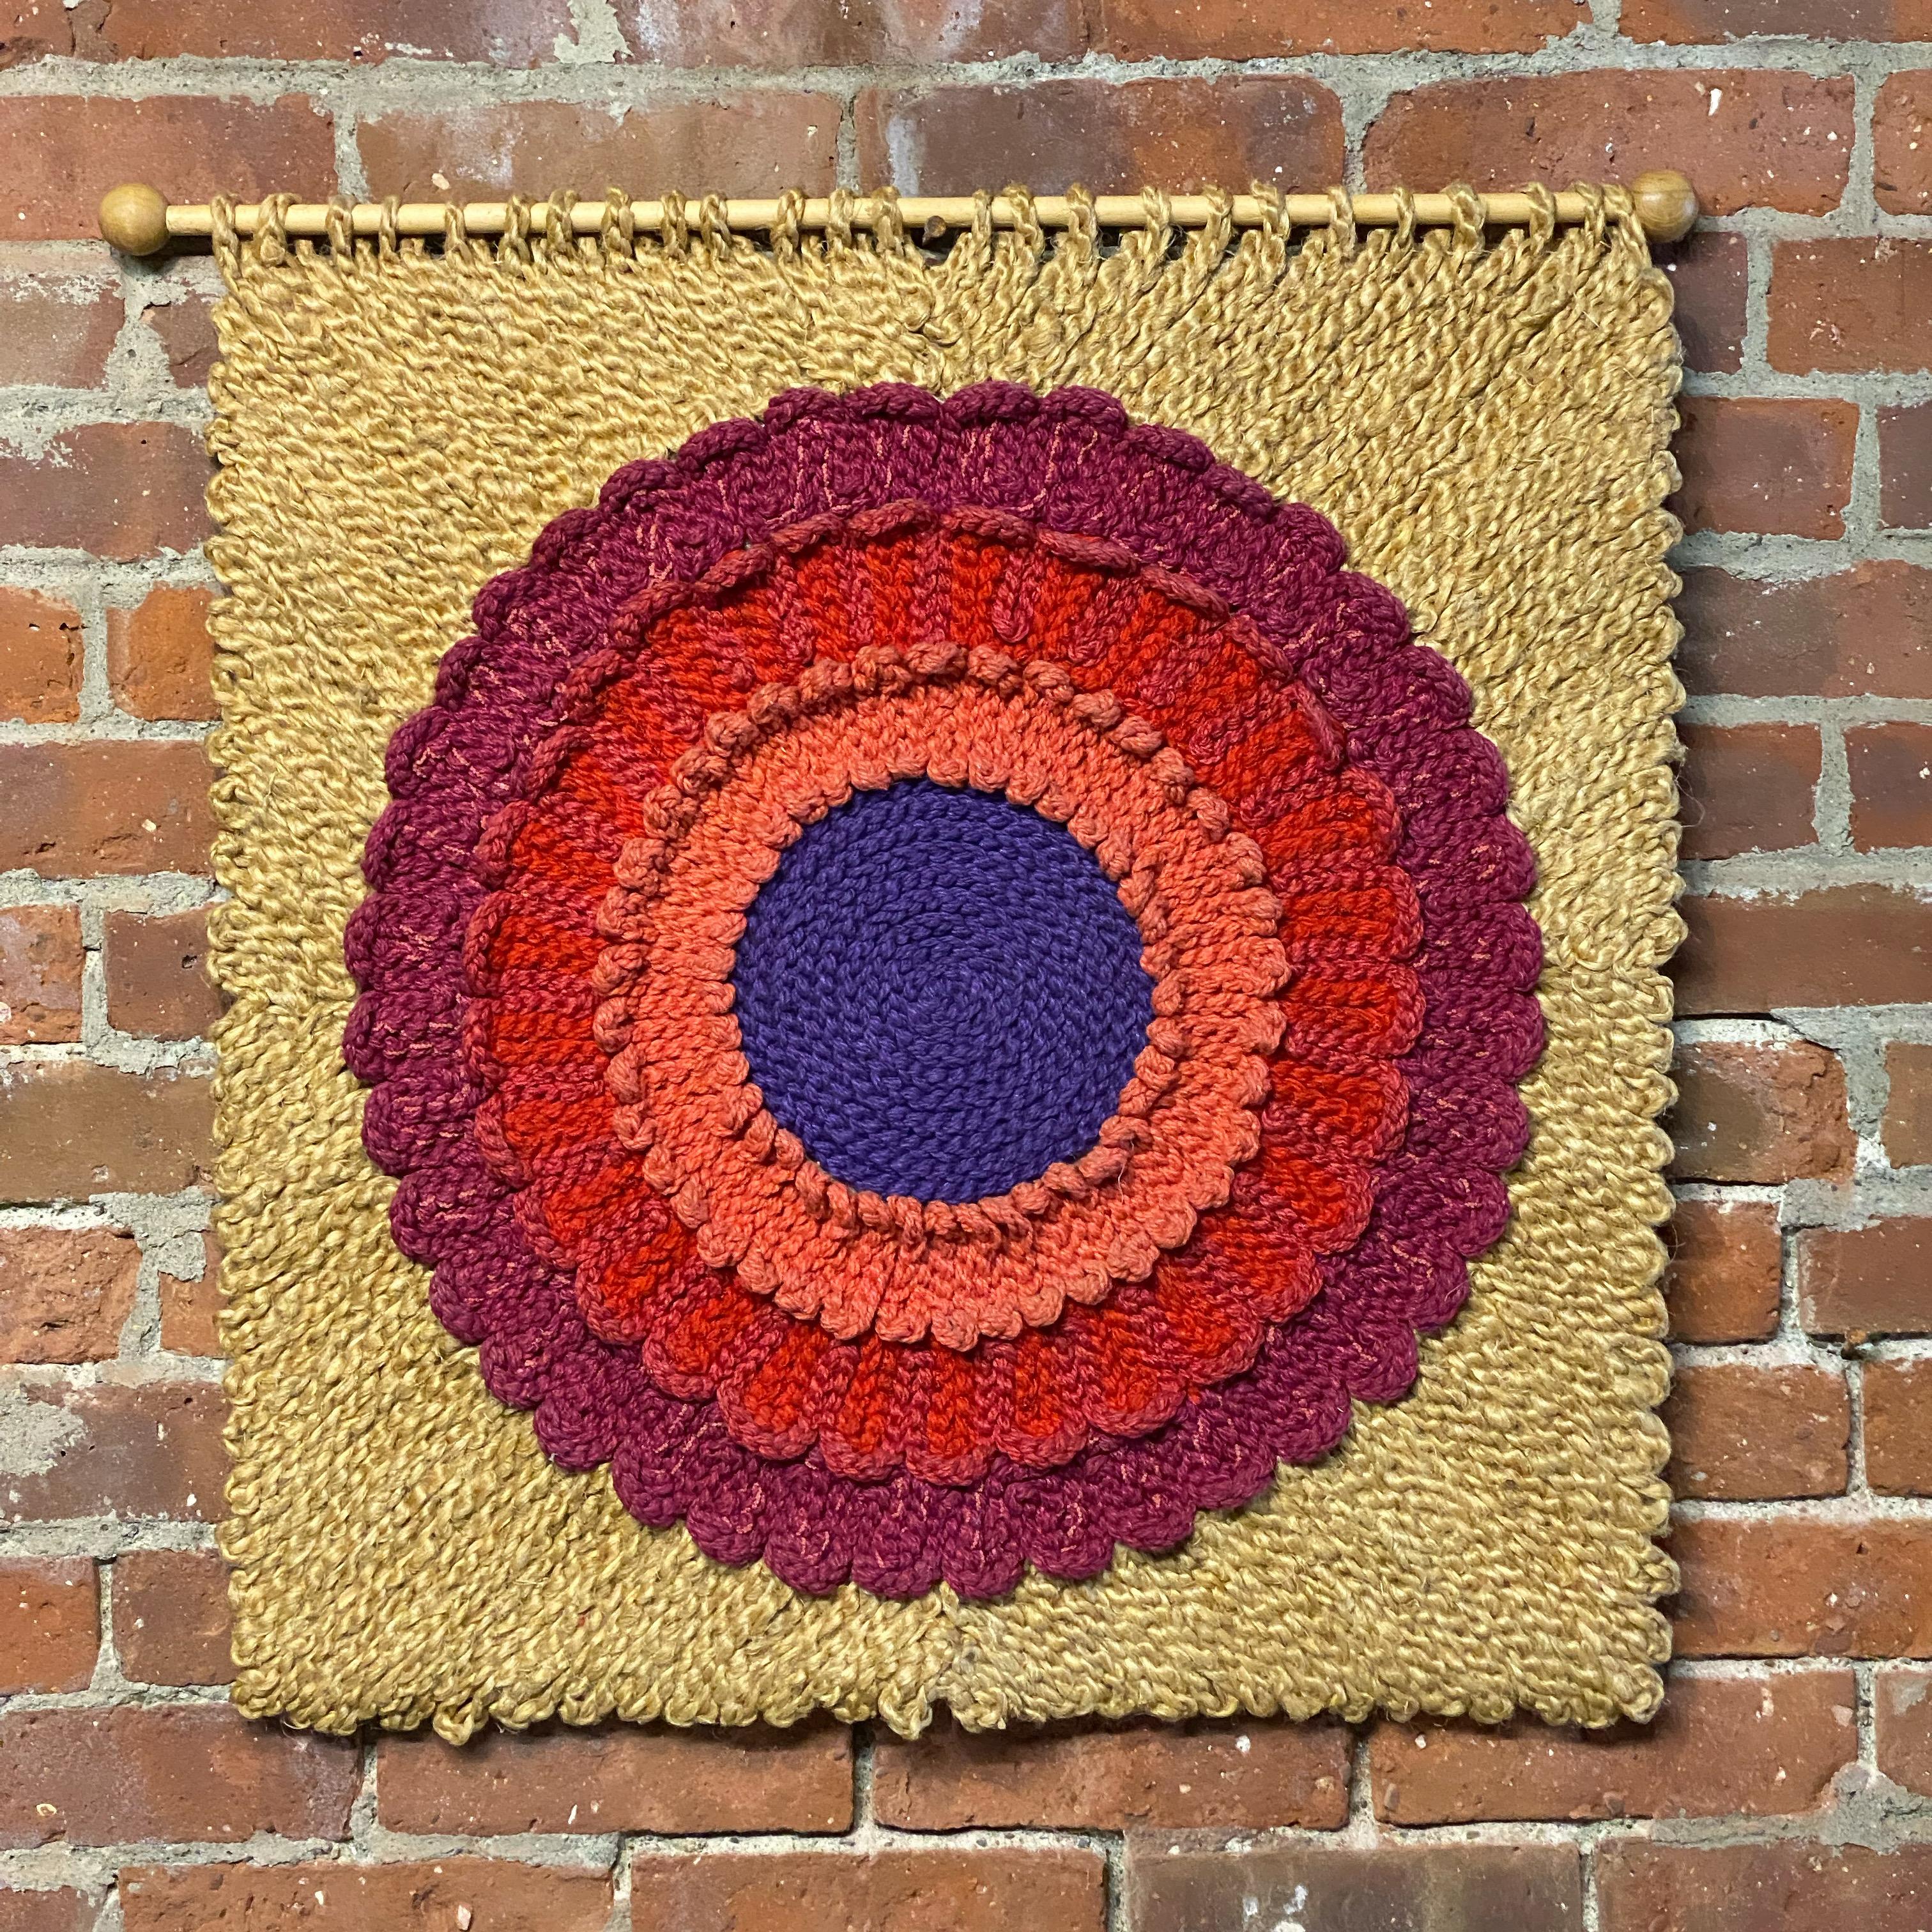 Vibrant and colorful floral fiber art wall hanging. Signed on the reverse, Szazsorszep, P. Szaboeva. Szazsorszep translates to daisy or golden daisy in Hungarian. The piece is comprised of a tan colored jute and what appears to be wool yarn in